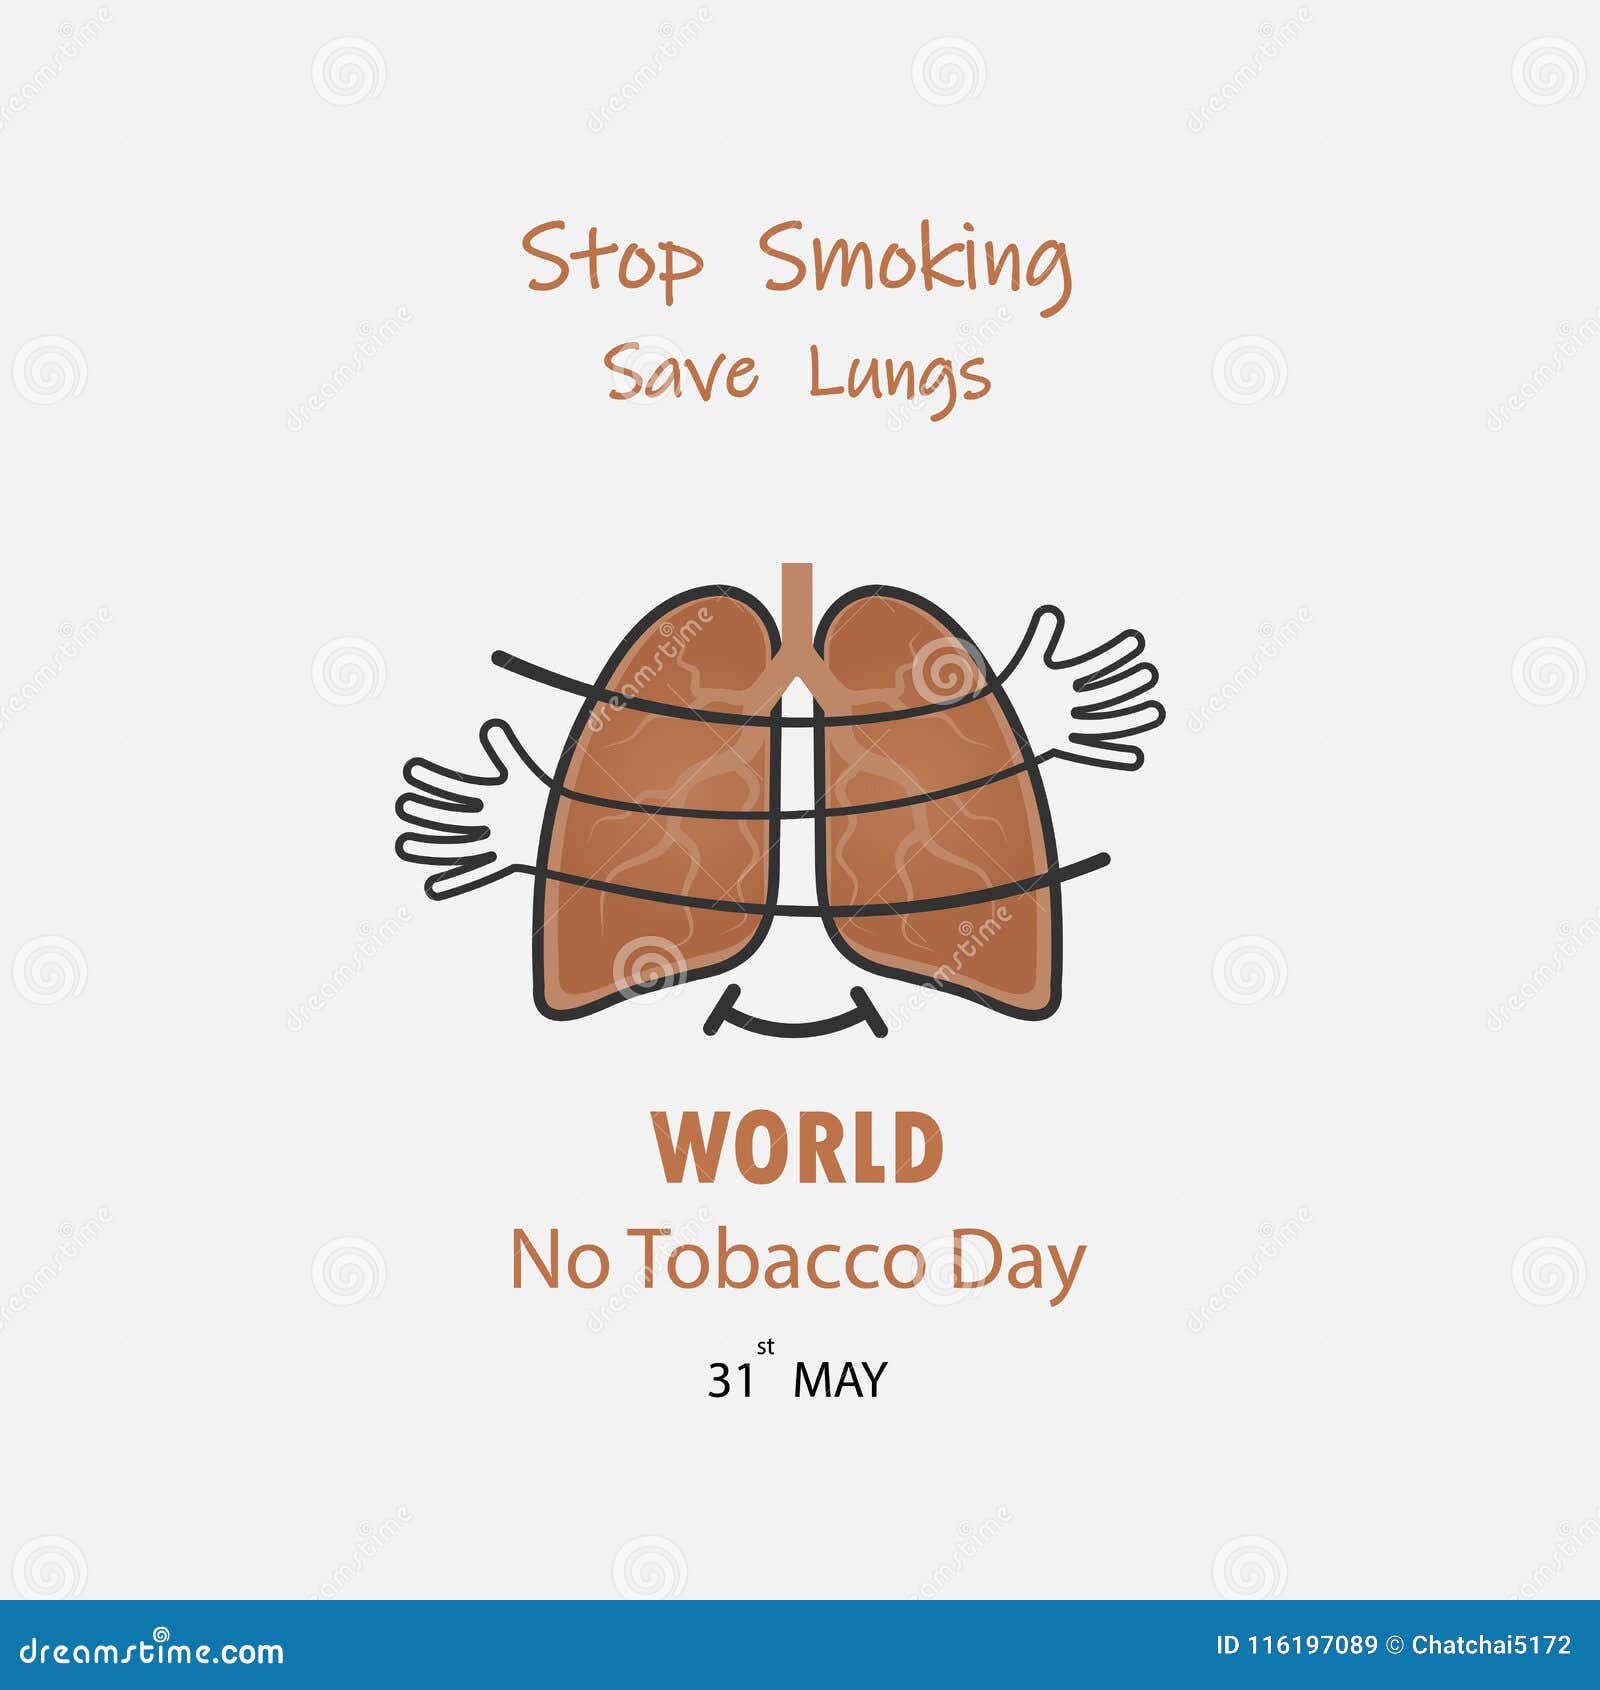 Lung Cute Cartoon Character And Stop Smoking & Save Lungs ...